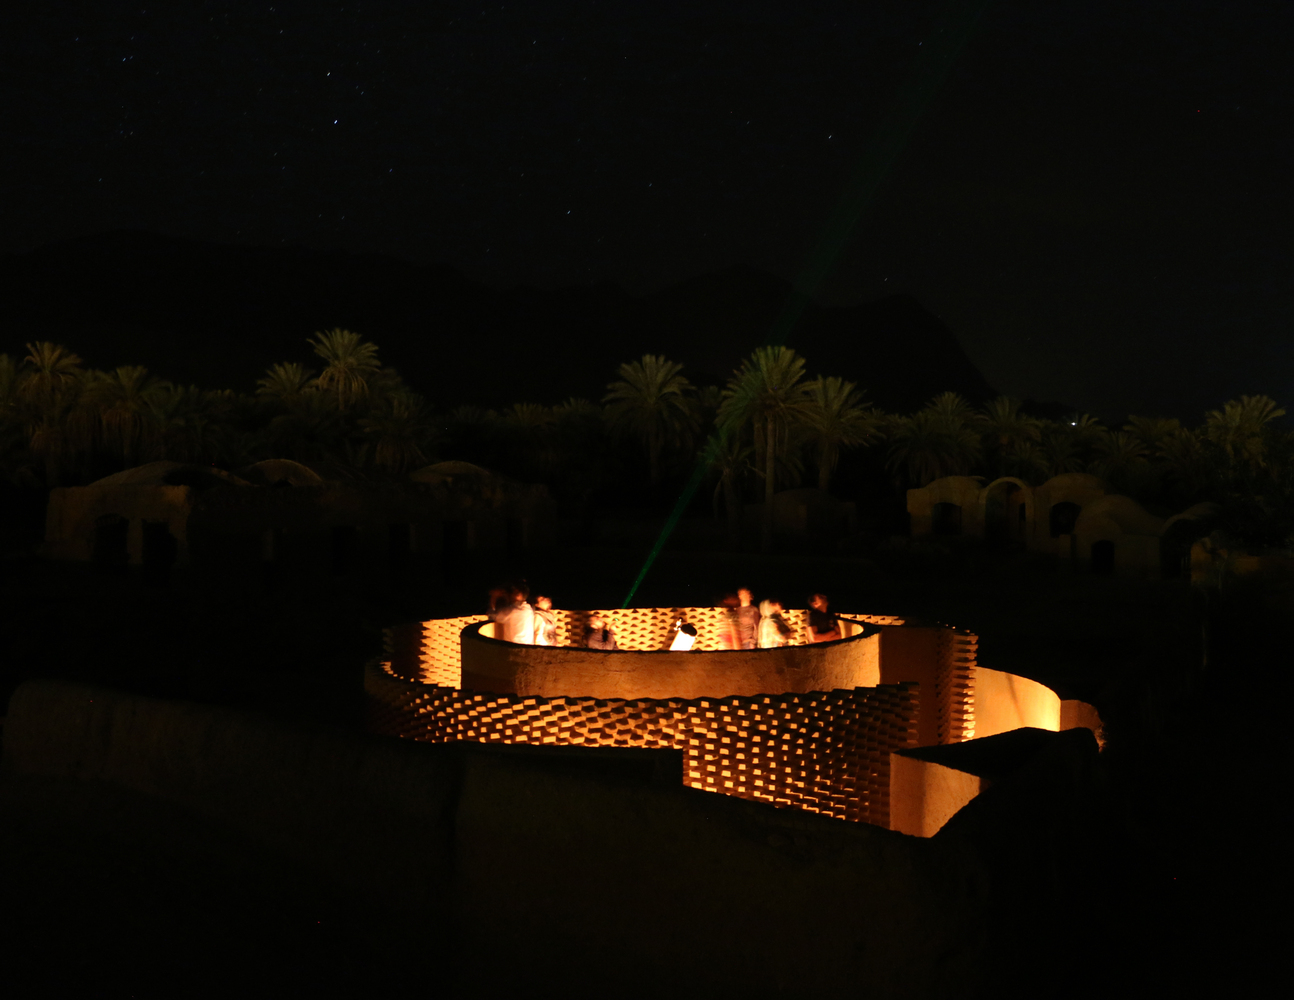 Observatory in the Desert at night